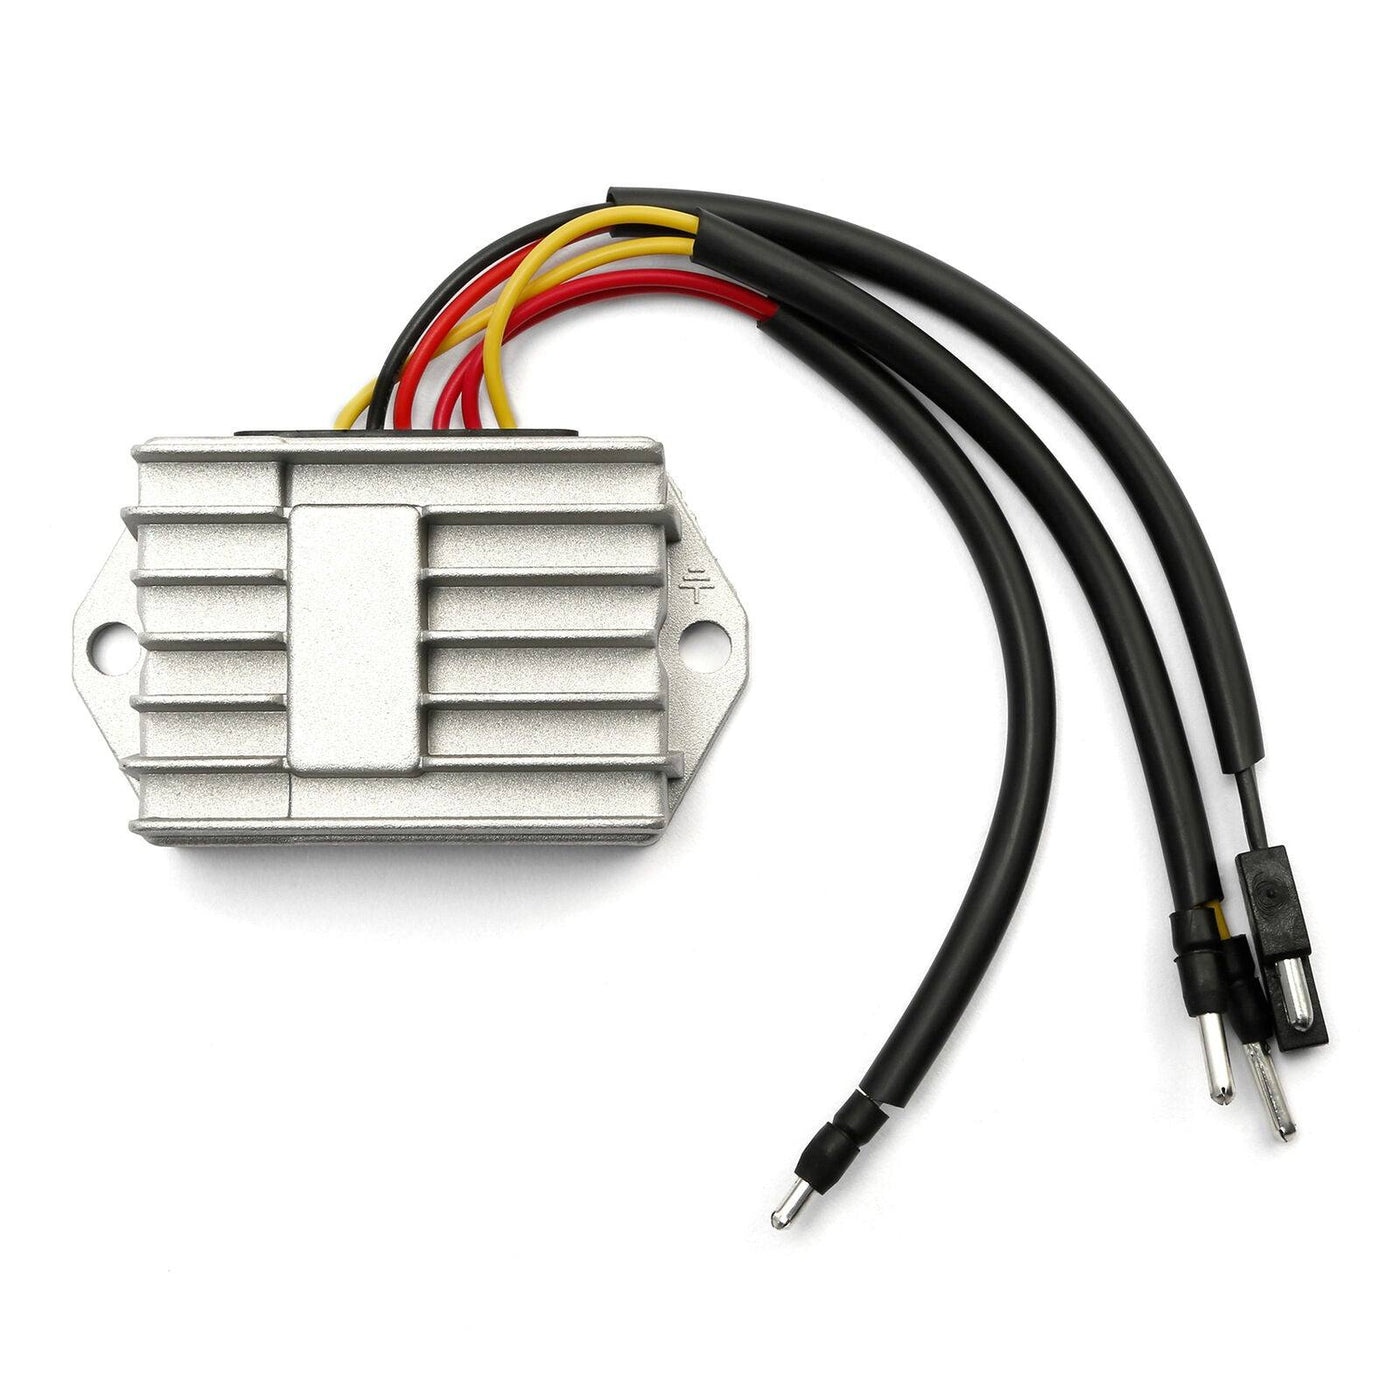 Voltage Regulator Rectifier Fit For Ducati MONSTER 600 MONSTER 400 1996-1997 - Moto Life Products